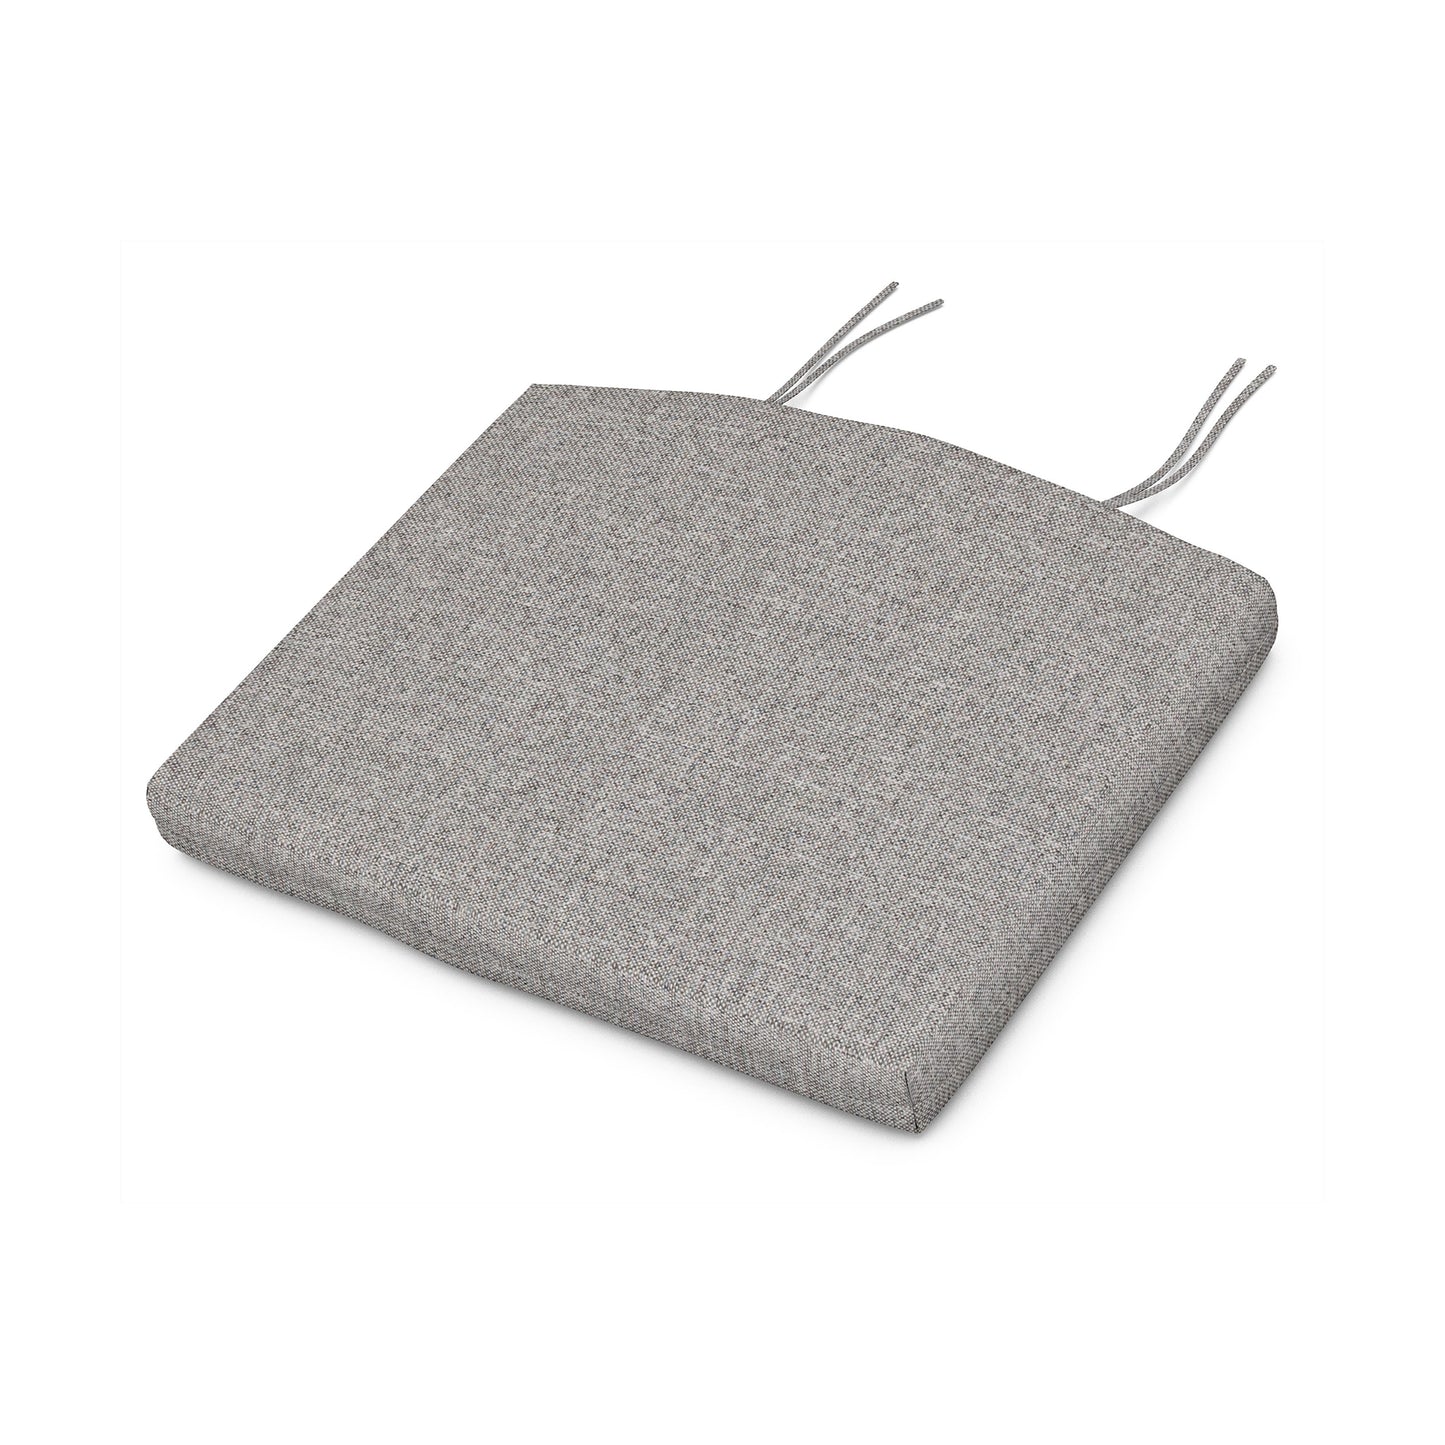 A square, gray POLYWOOD® XPWS0003 Seat Cushion with two tie straps on a white background.